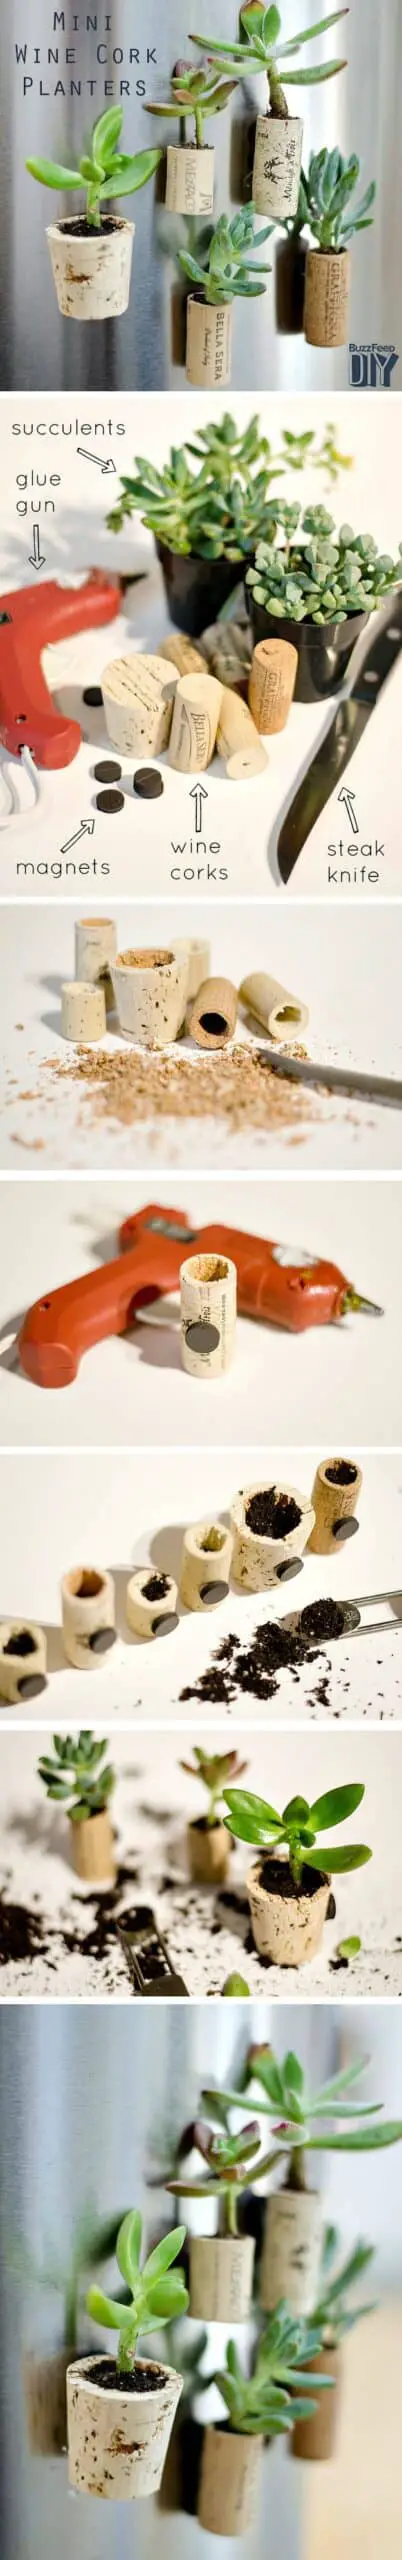 Diy: Tiny Planters From Upcycled Wine Corks 21 - upcycle